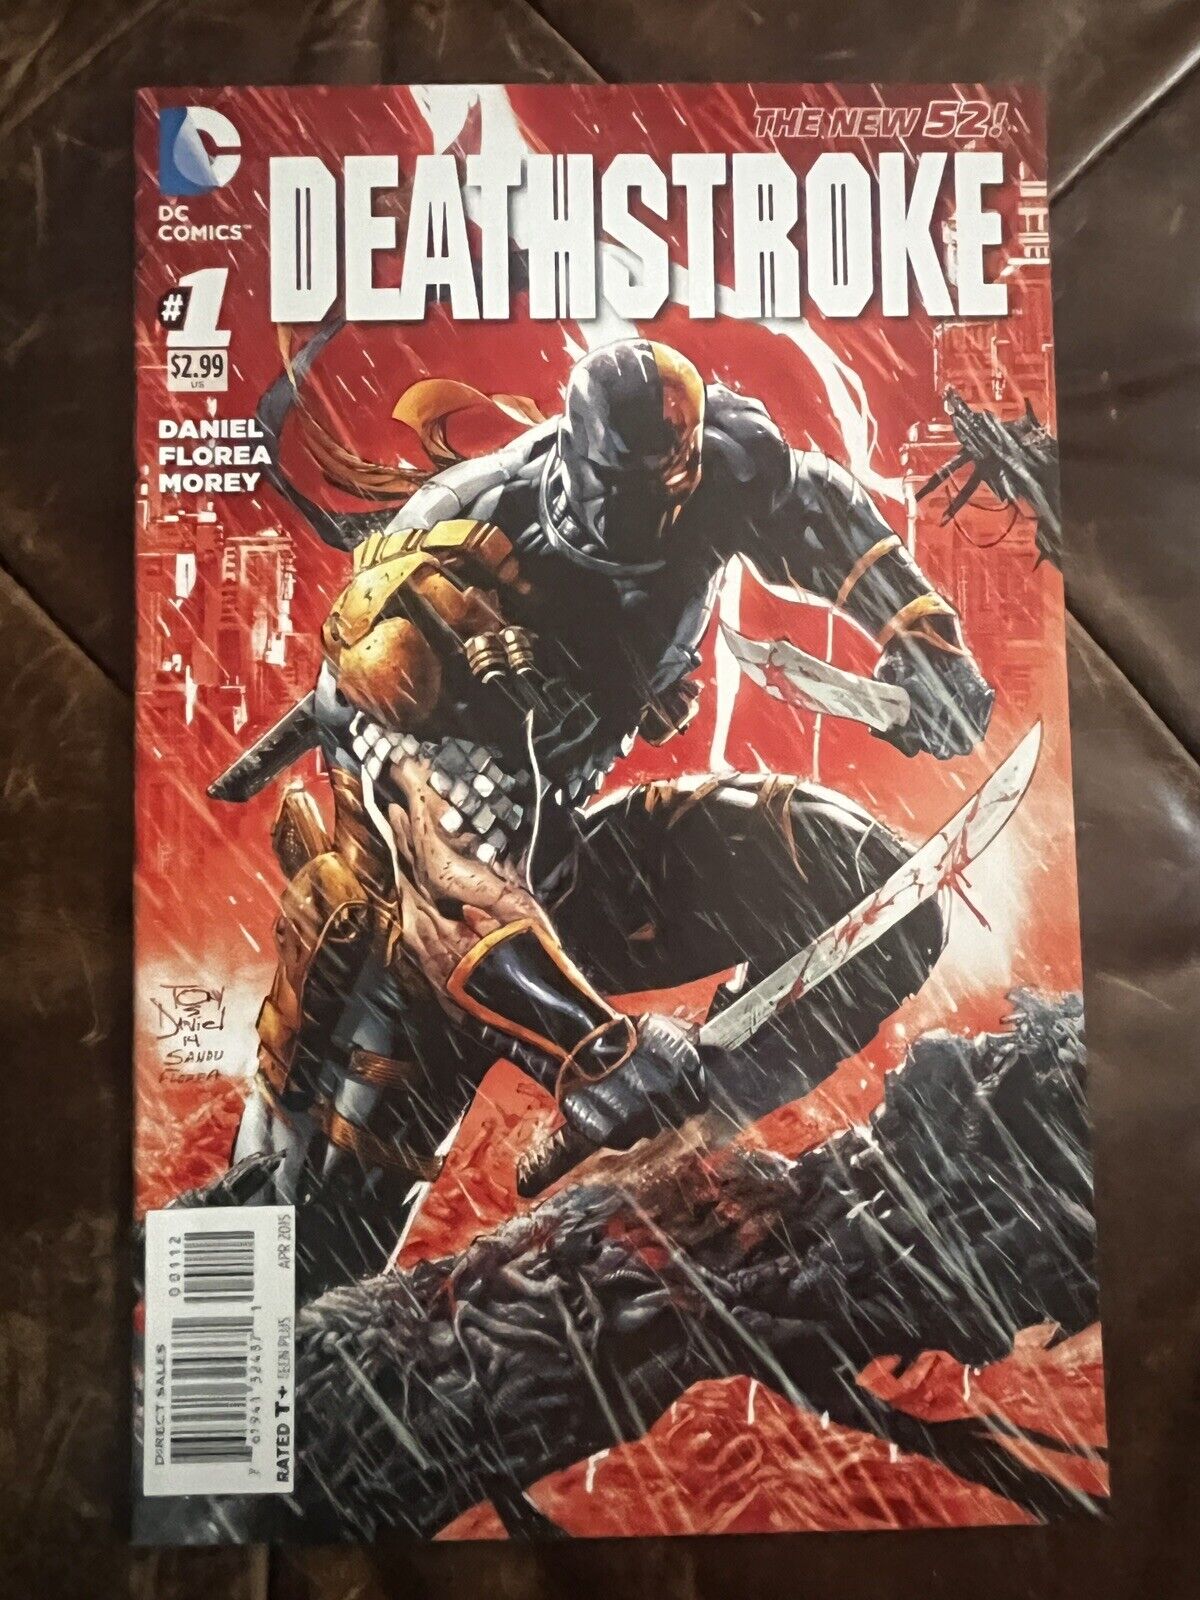 Deathstroke (2014) #1, The New 52, 2nd Print, NM/Near Mint